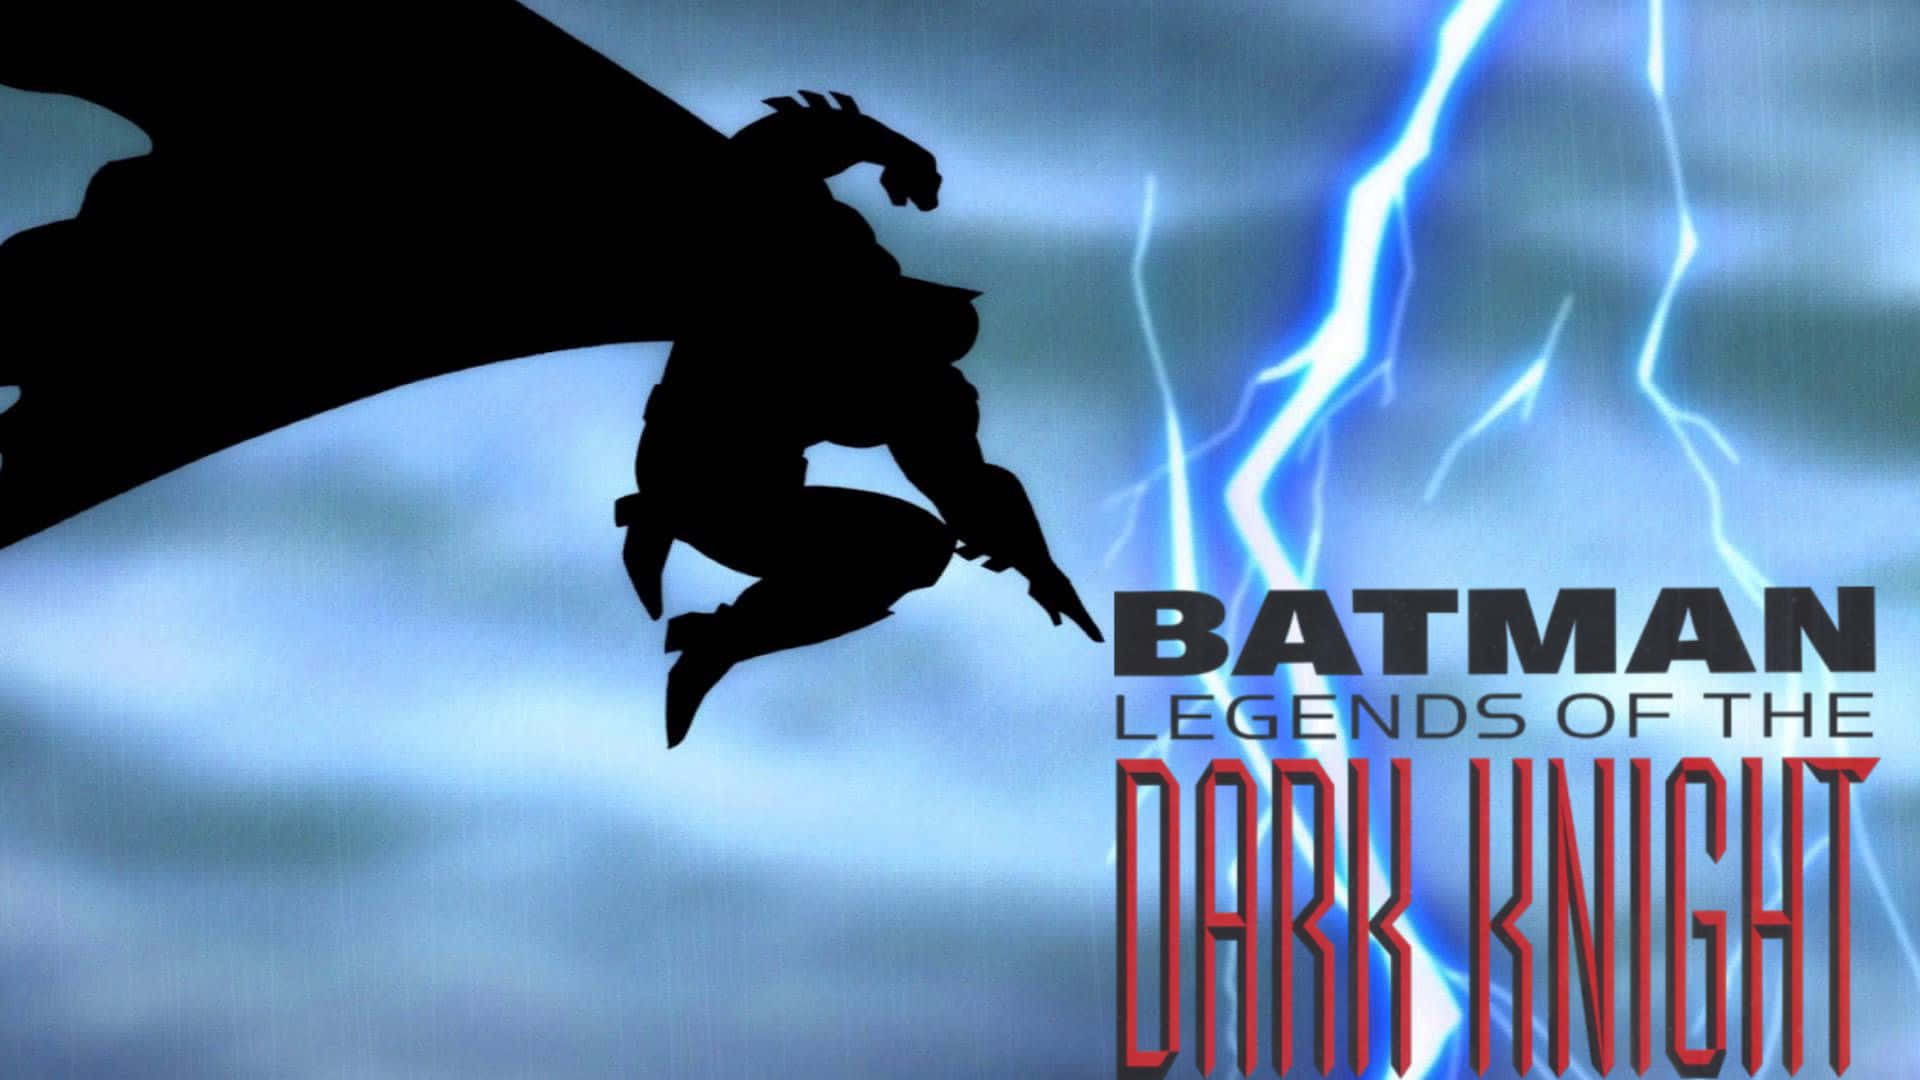 Legends of the Dark Knight in Action Wallpaper